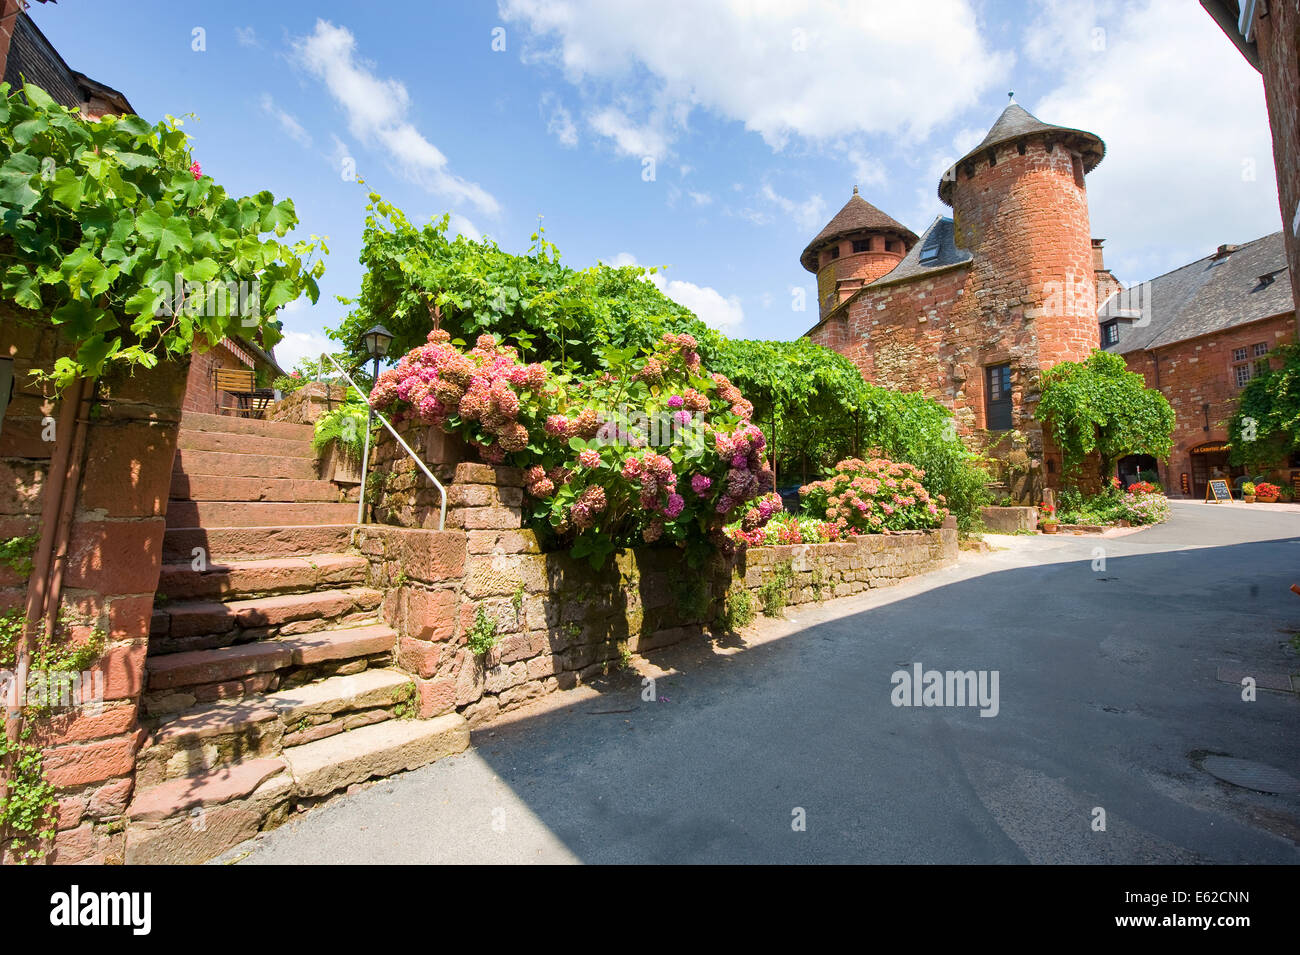 All the houses in the small picturesque city of Collonges la Rouge in France are built with red bricks Stock Photo